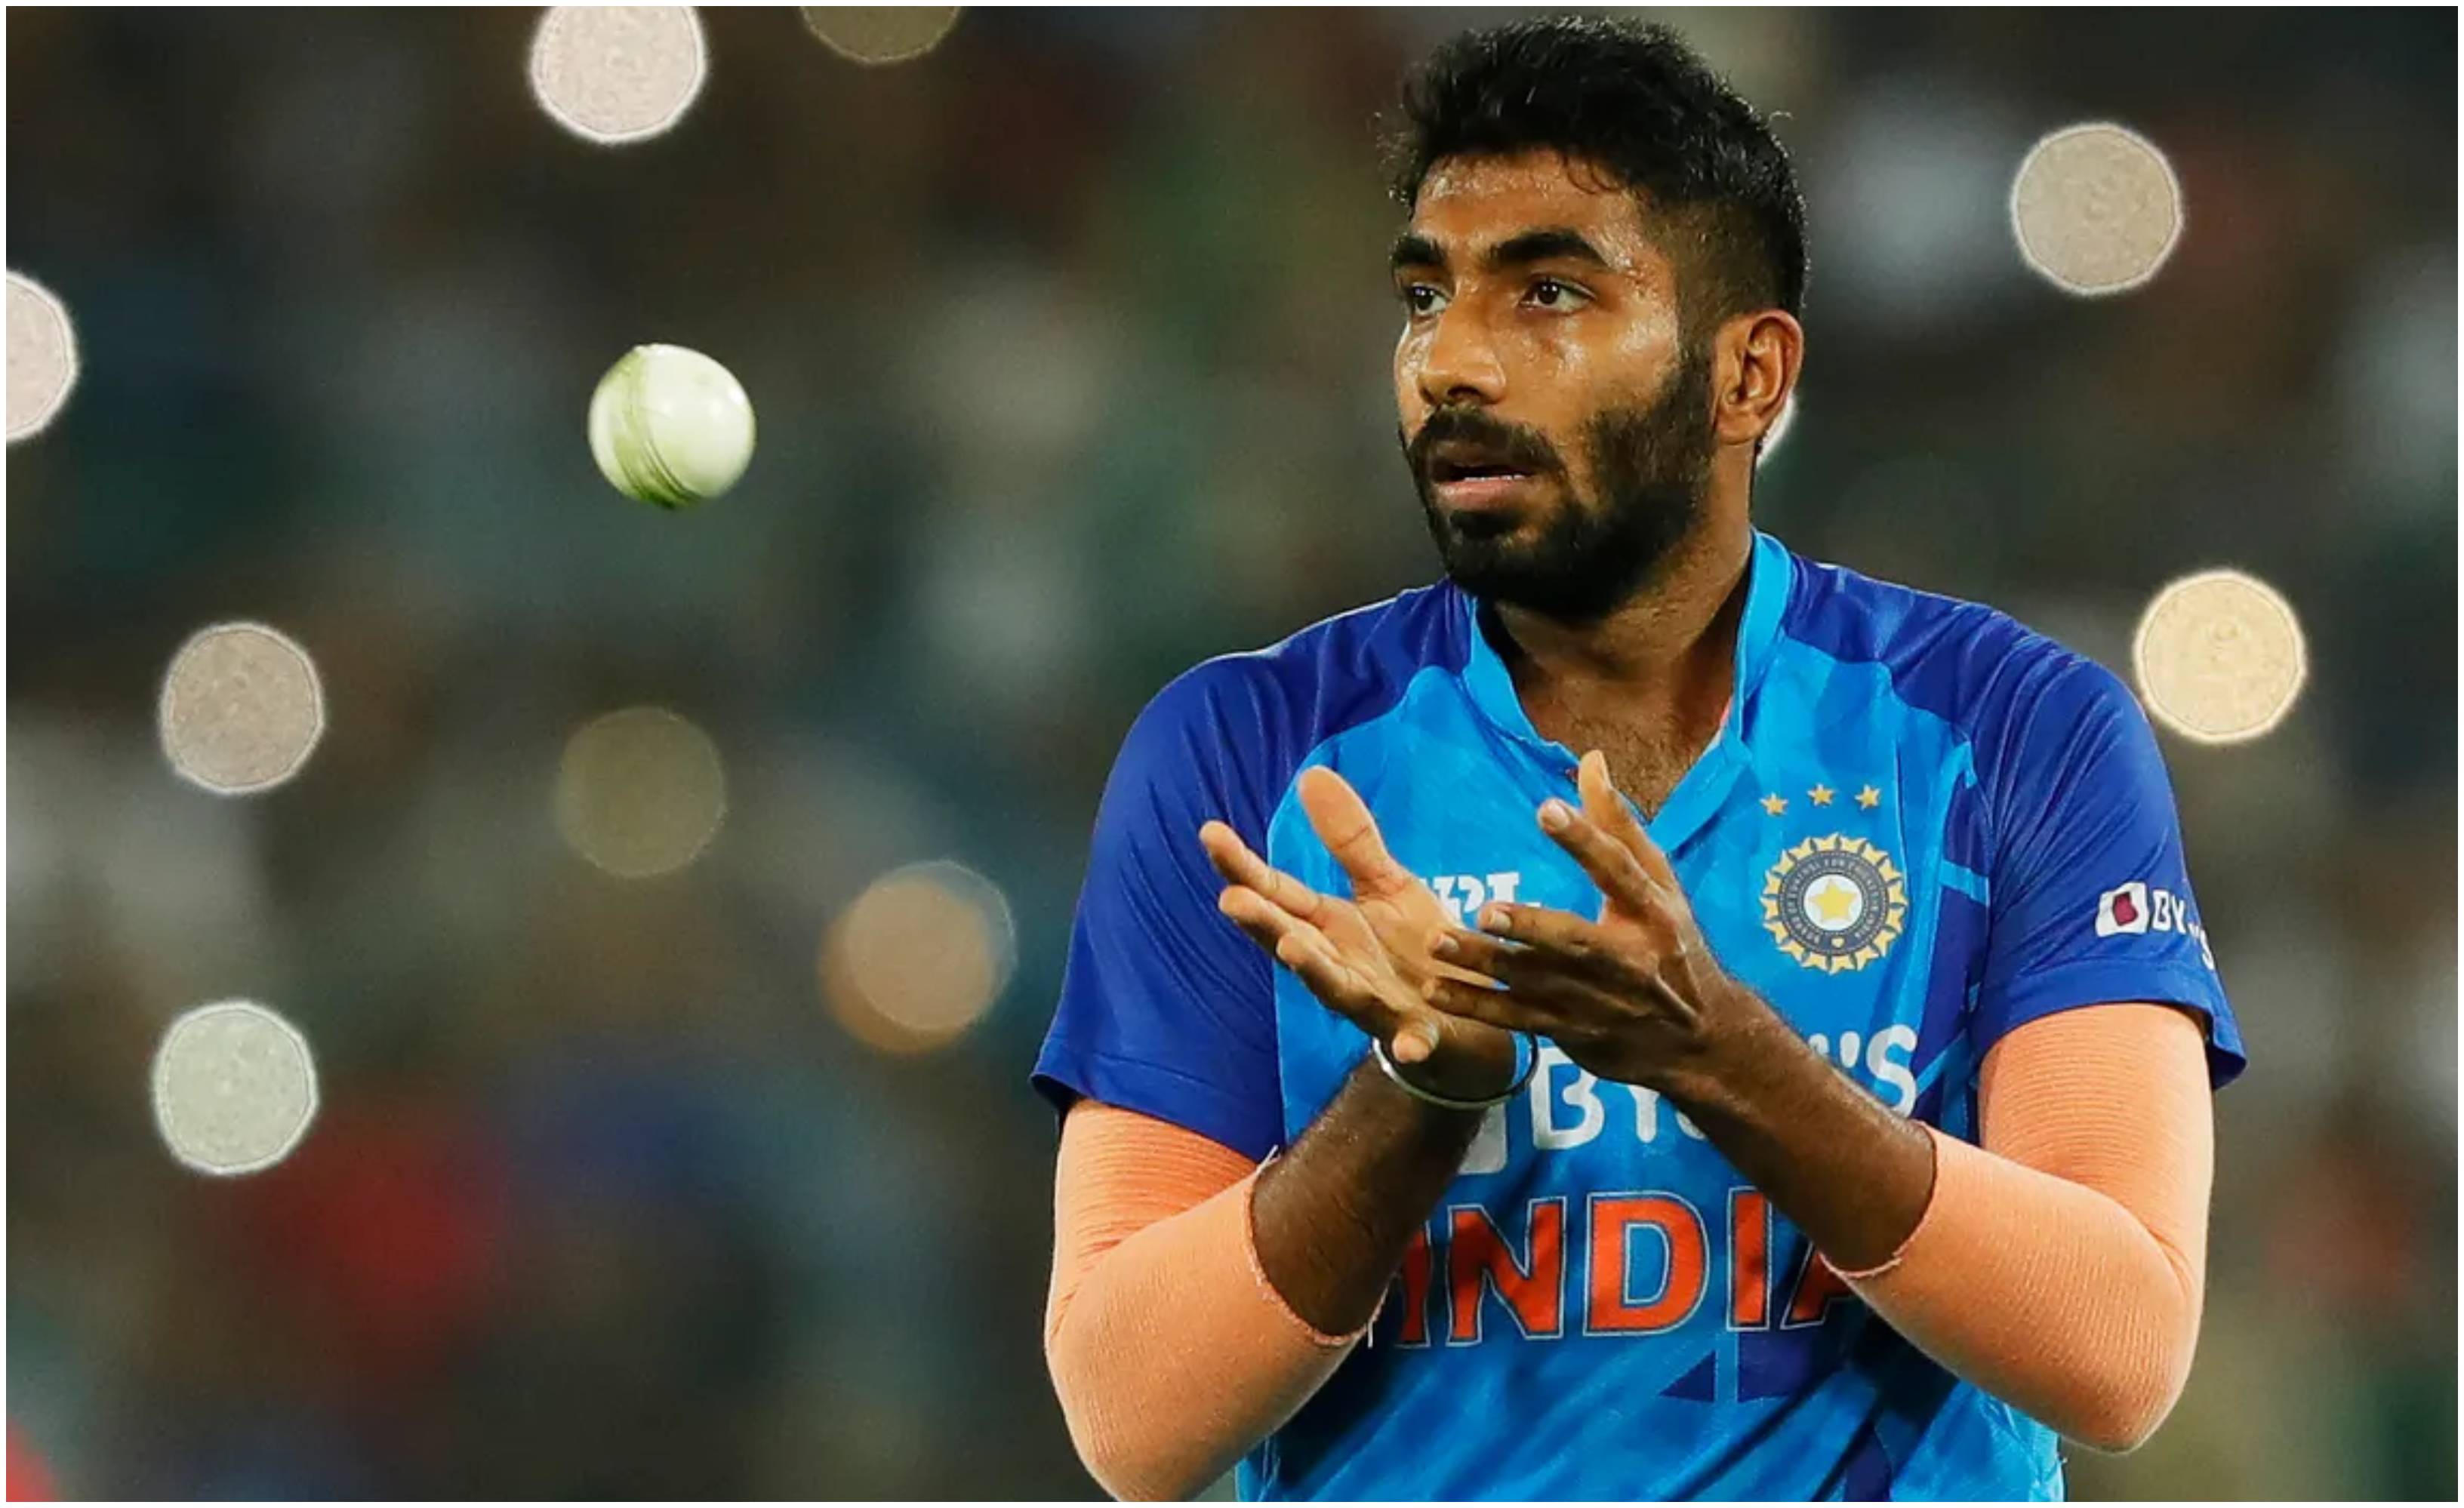 Jasprit Bumrah Injury: Ex-players Anshuman Gaekwad & Dodda Ganesh declare, 'Bumrah ruled out of T20 World Cup is a big blow, his experience and quality will be missed in Australia’